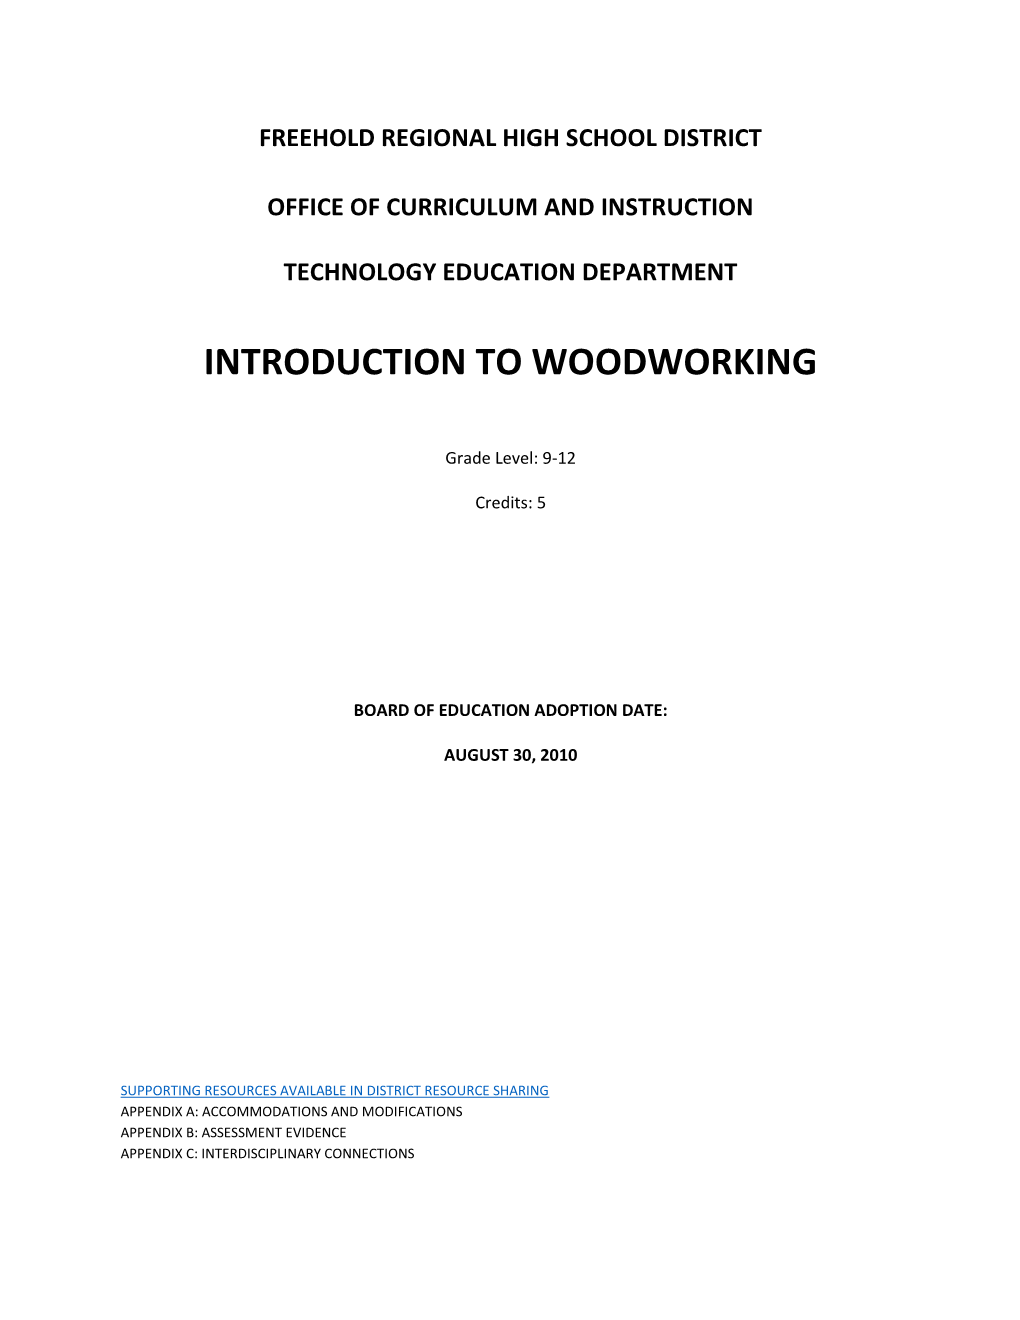 Introduction to Woodworking